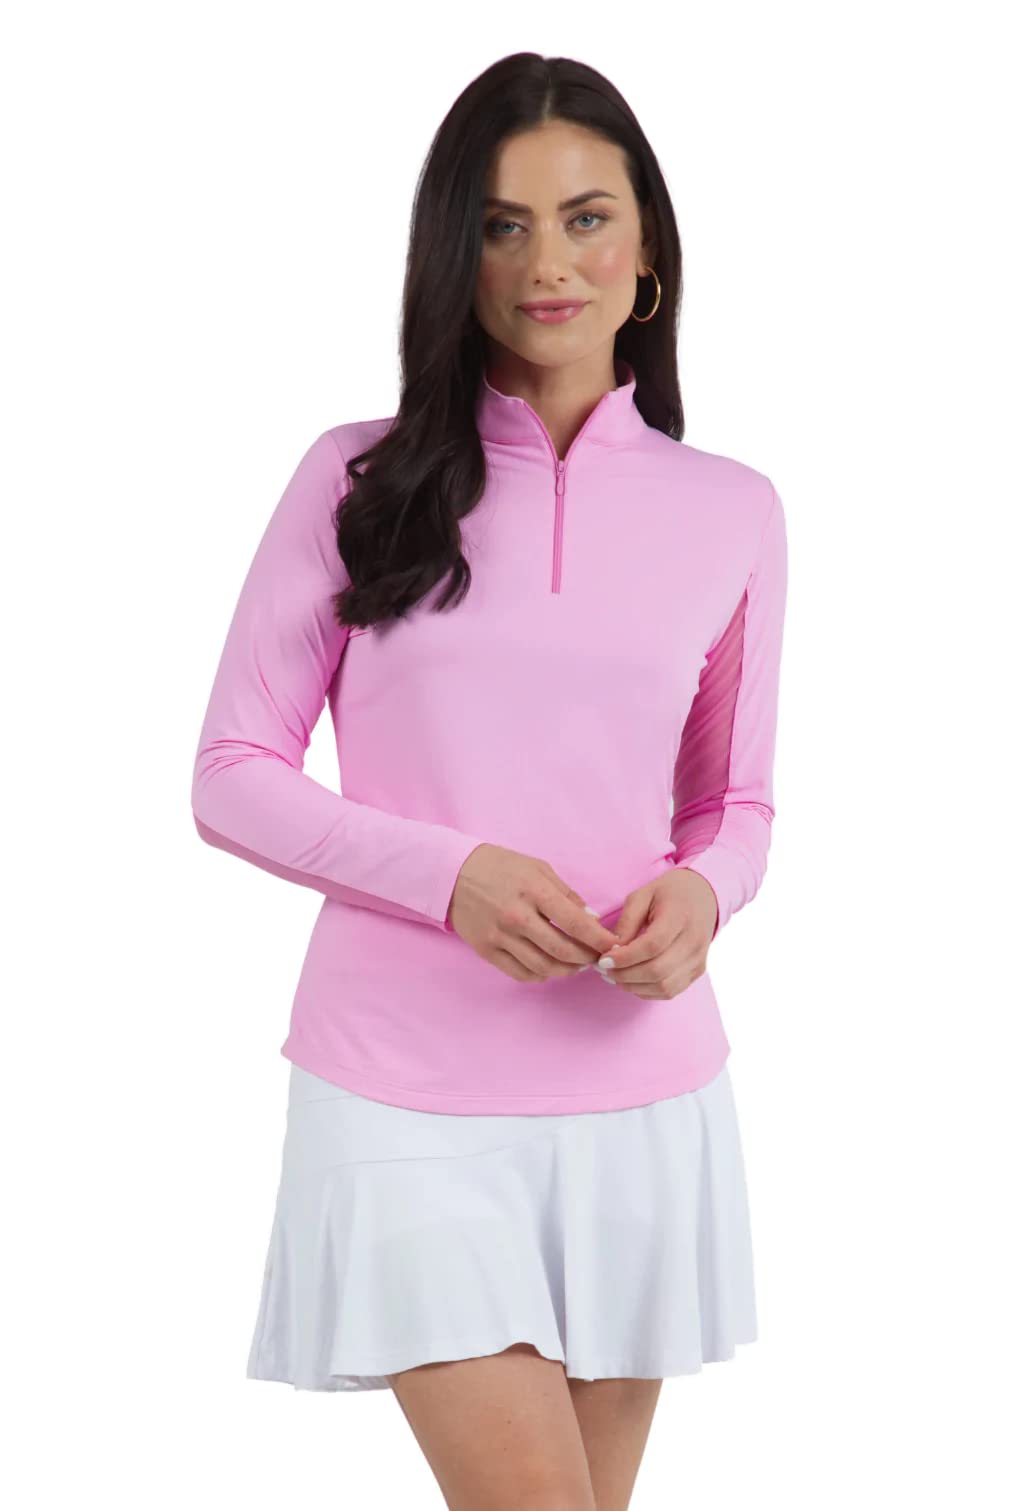 IBKUL Athleisure Wear Sun Protective UPF 50+ Icefil Cooling Tech Long Sleeve Mock Neck Top with Under Arm Mesh 80000 Red Solid S